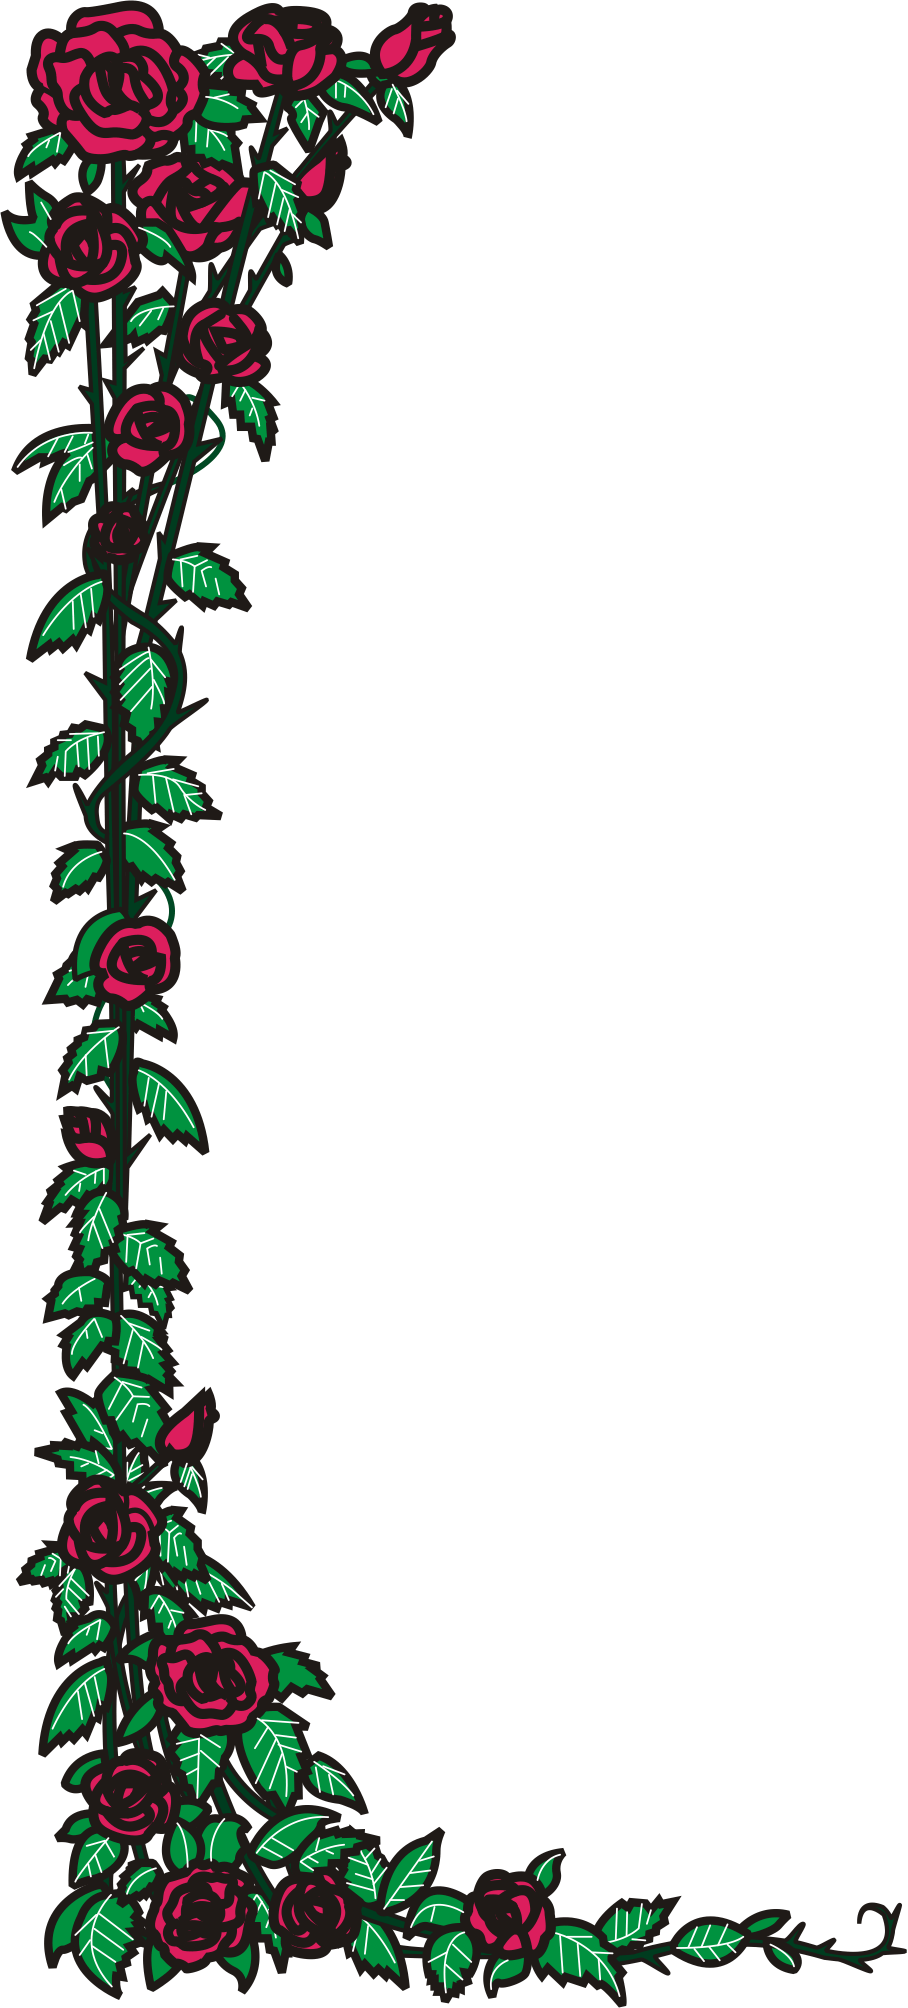 Boarder clipart rose. Border panda free images